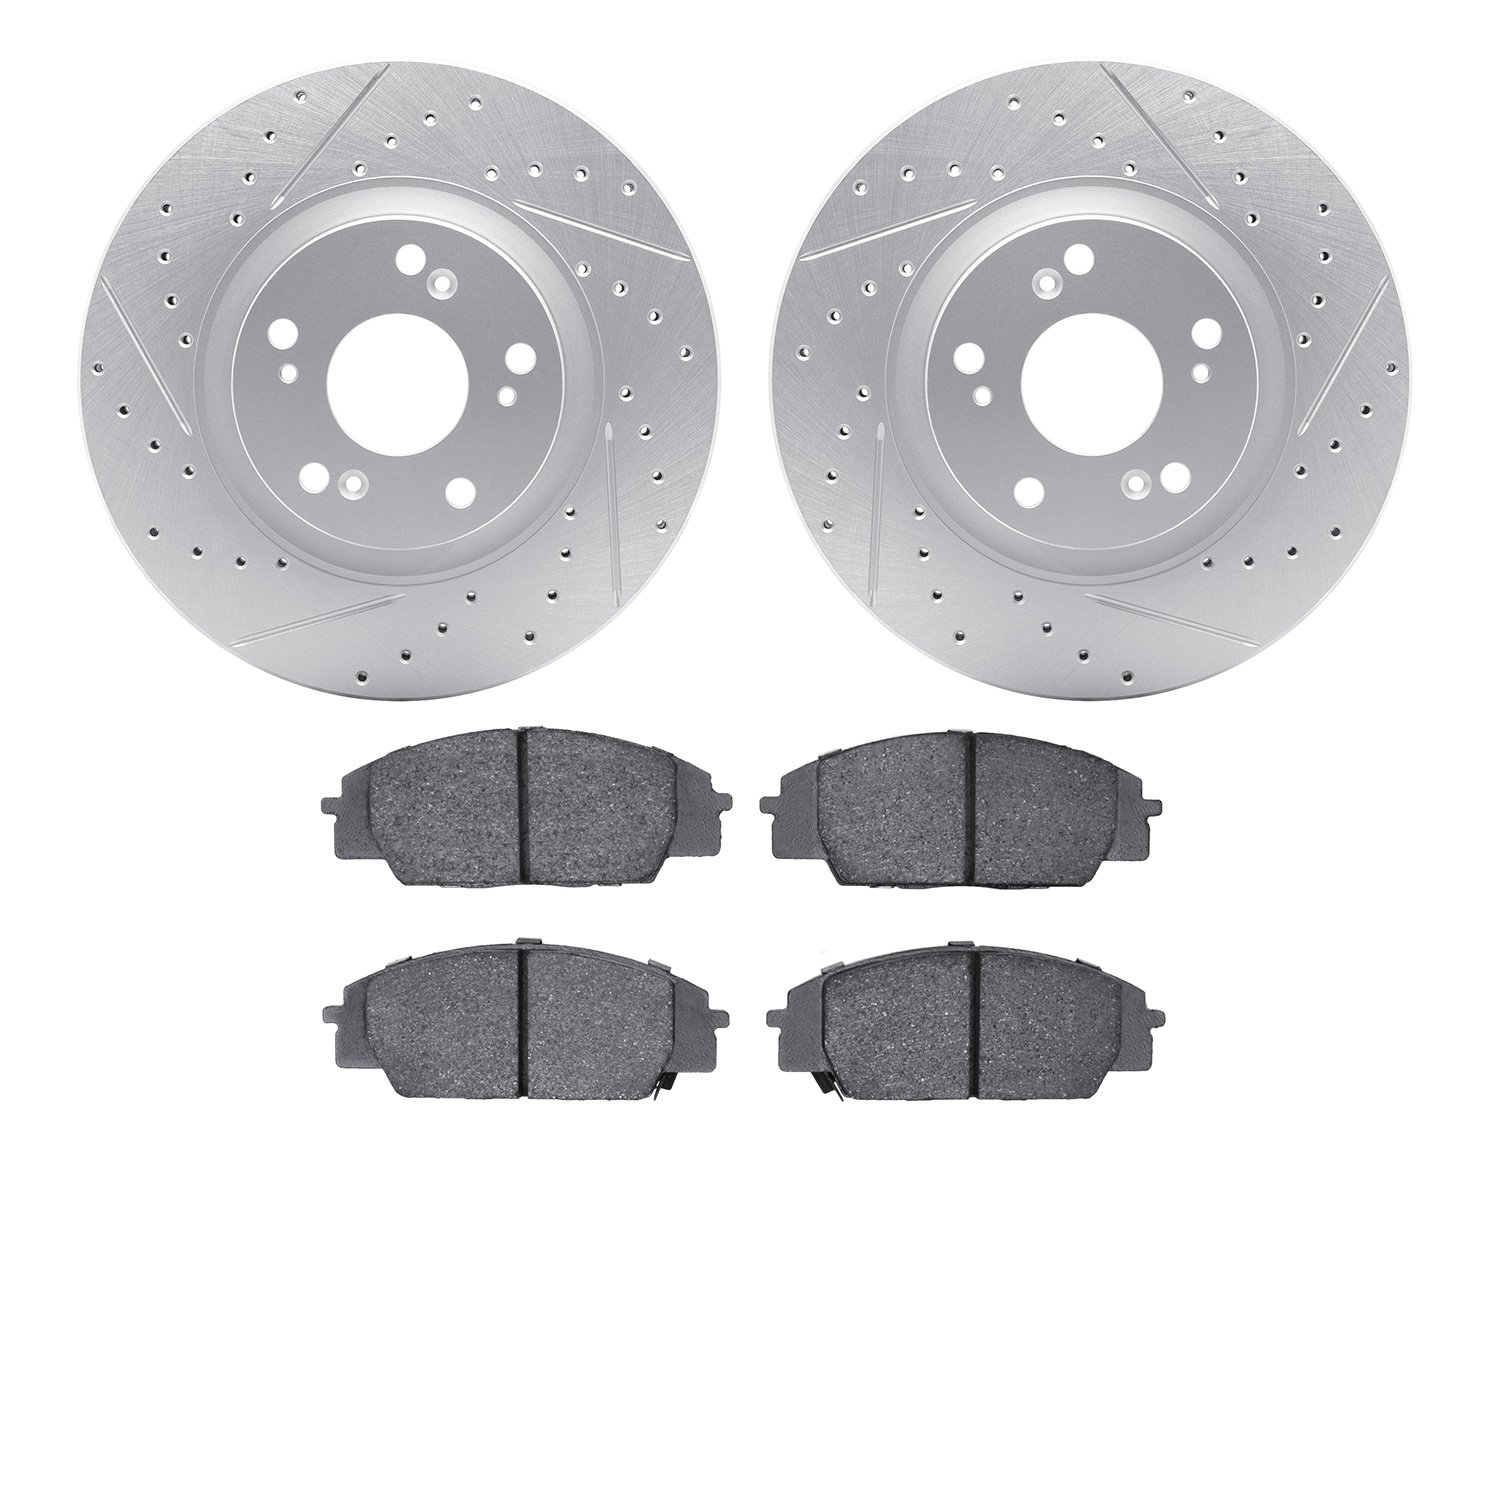 2502-59054 Geoperformance Drilled/Slotted Rotors w/5000 Advanced Brake Pads Kit, 2006-2011 Acura/Honda, Position: Front